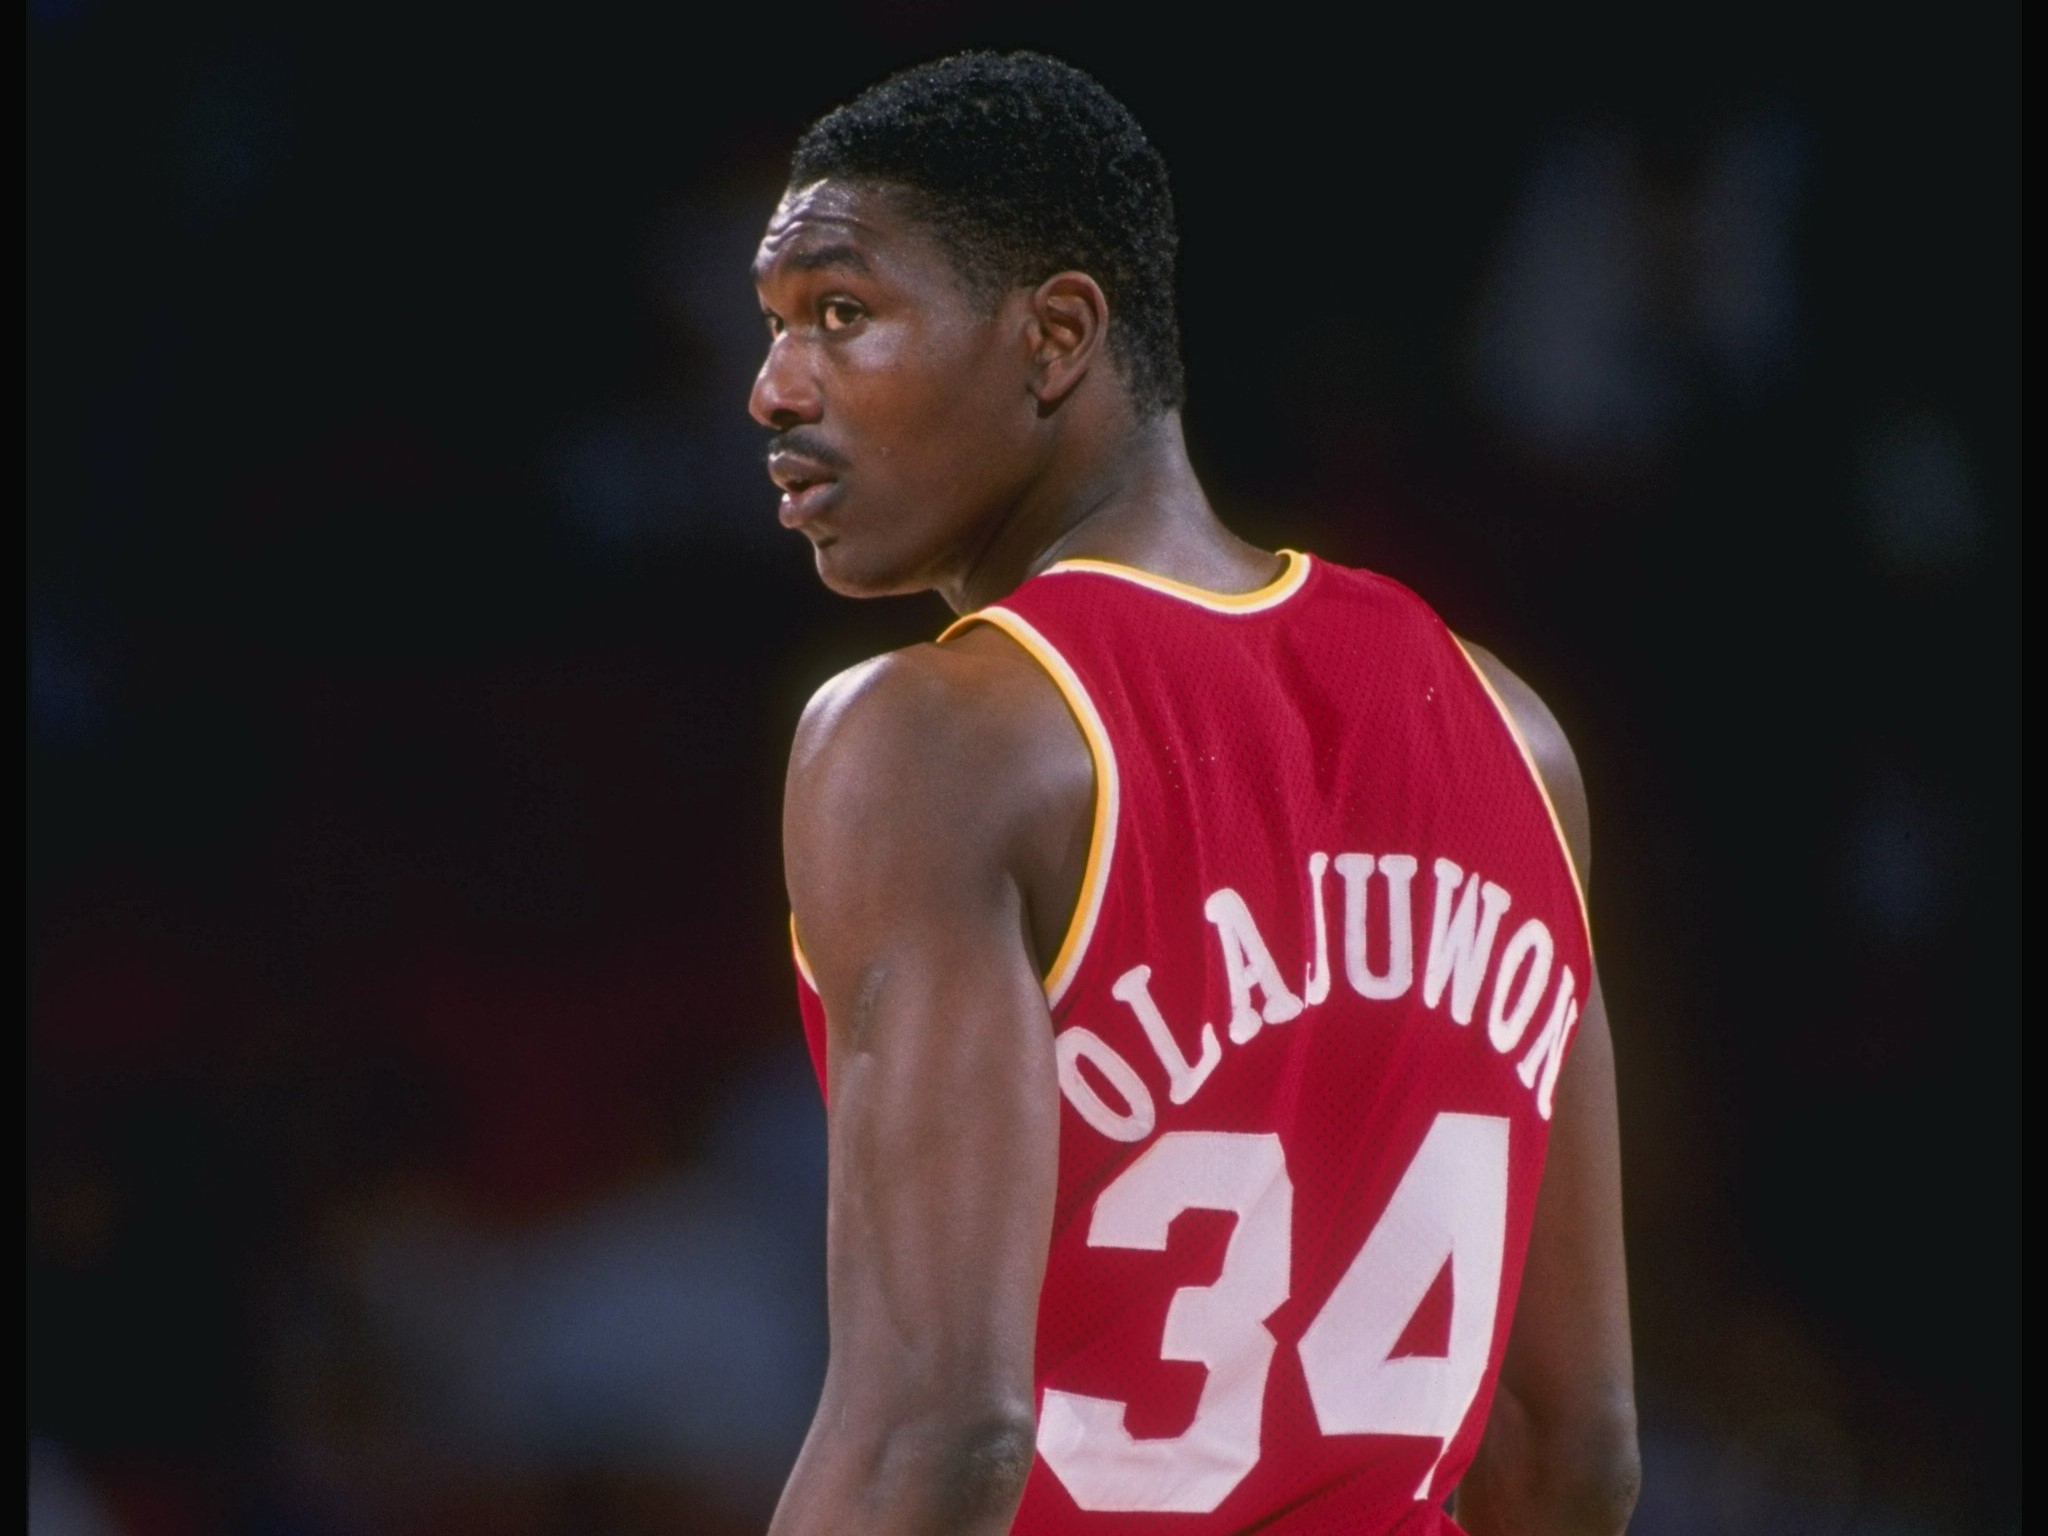 Ranking the Top 10 NBA Centers of the 1980s